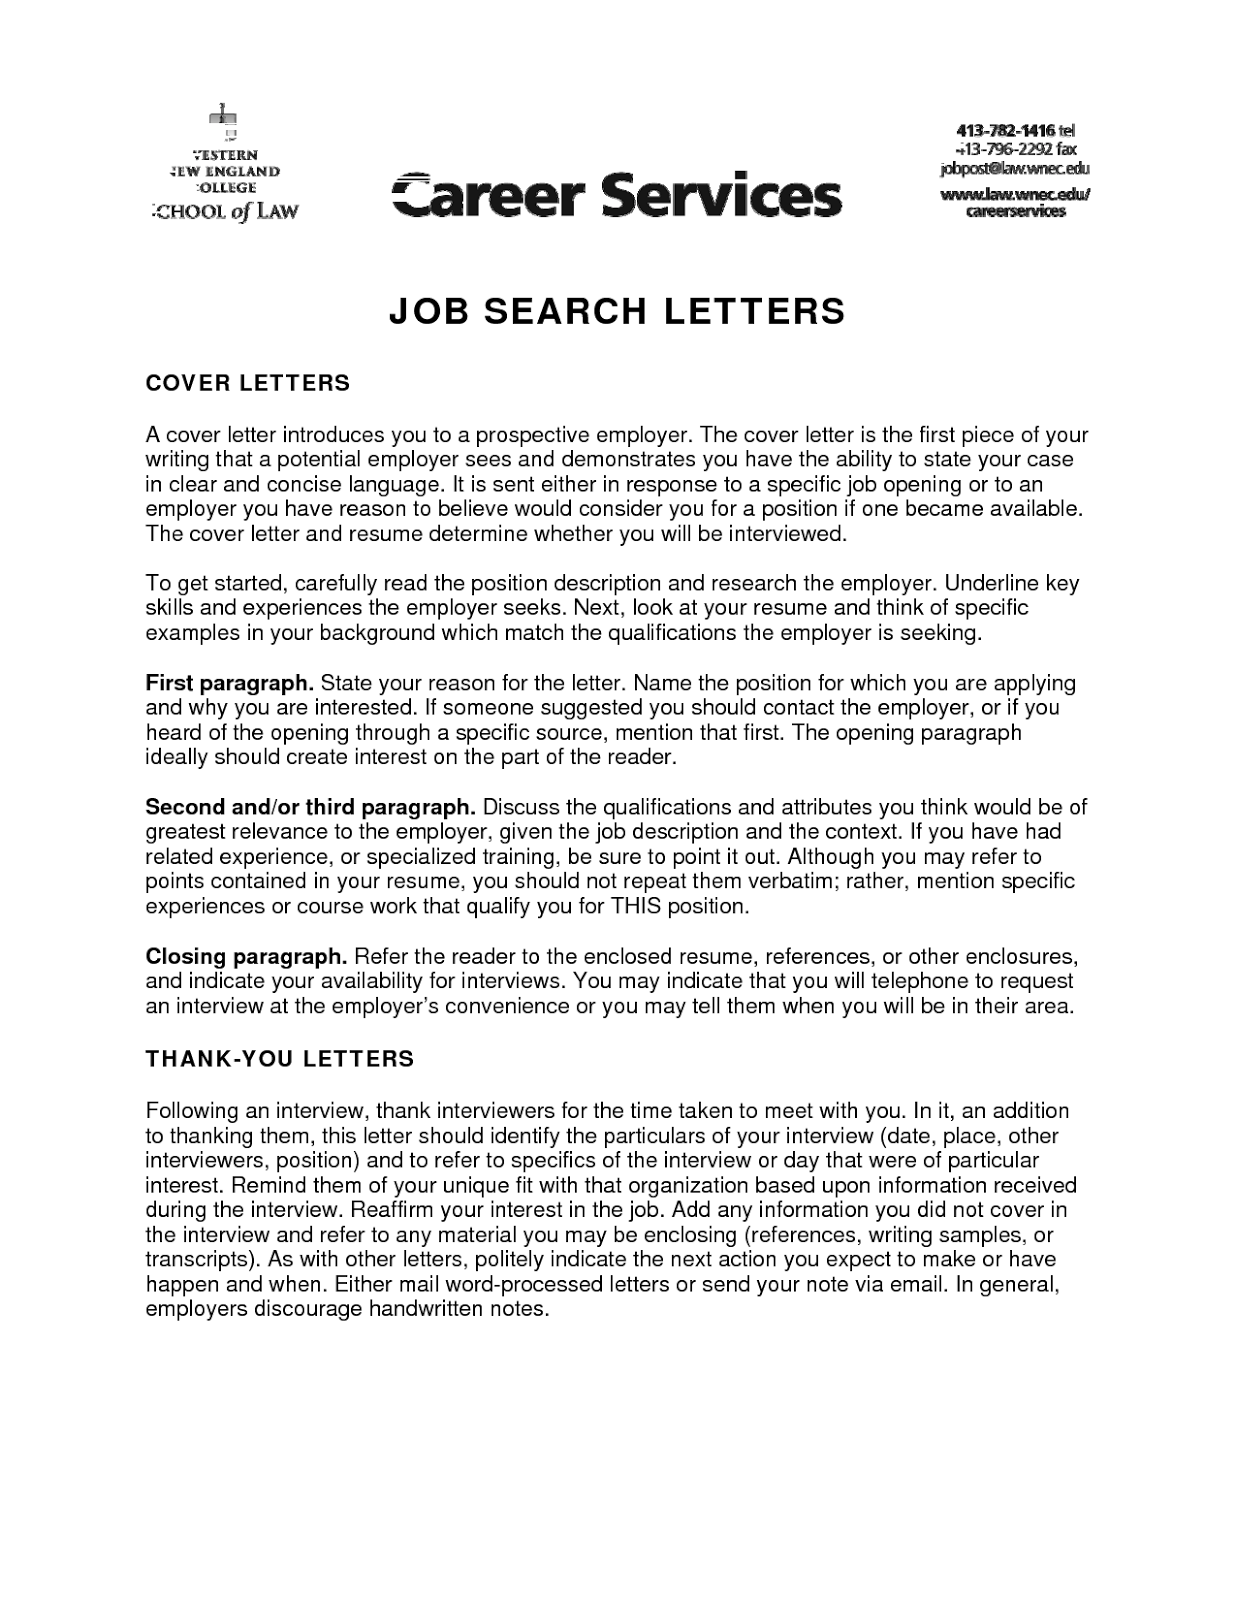 Cover letter examples internal positions